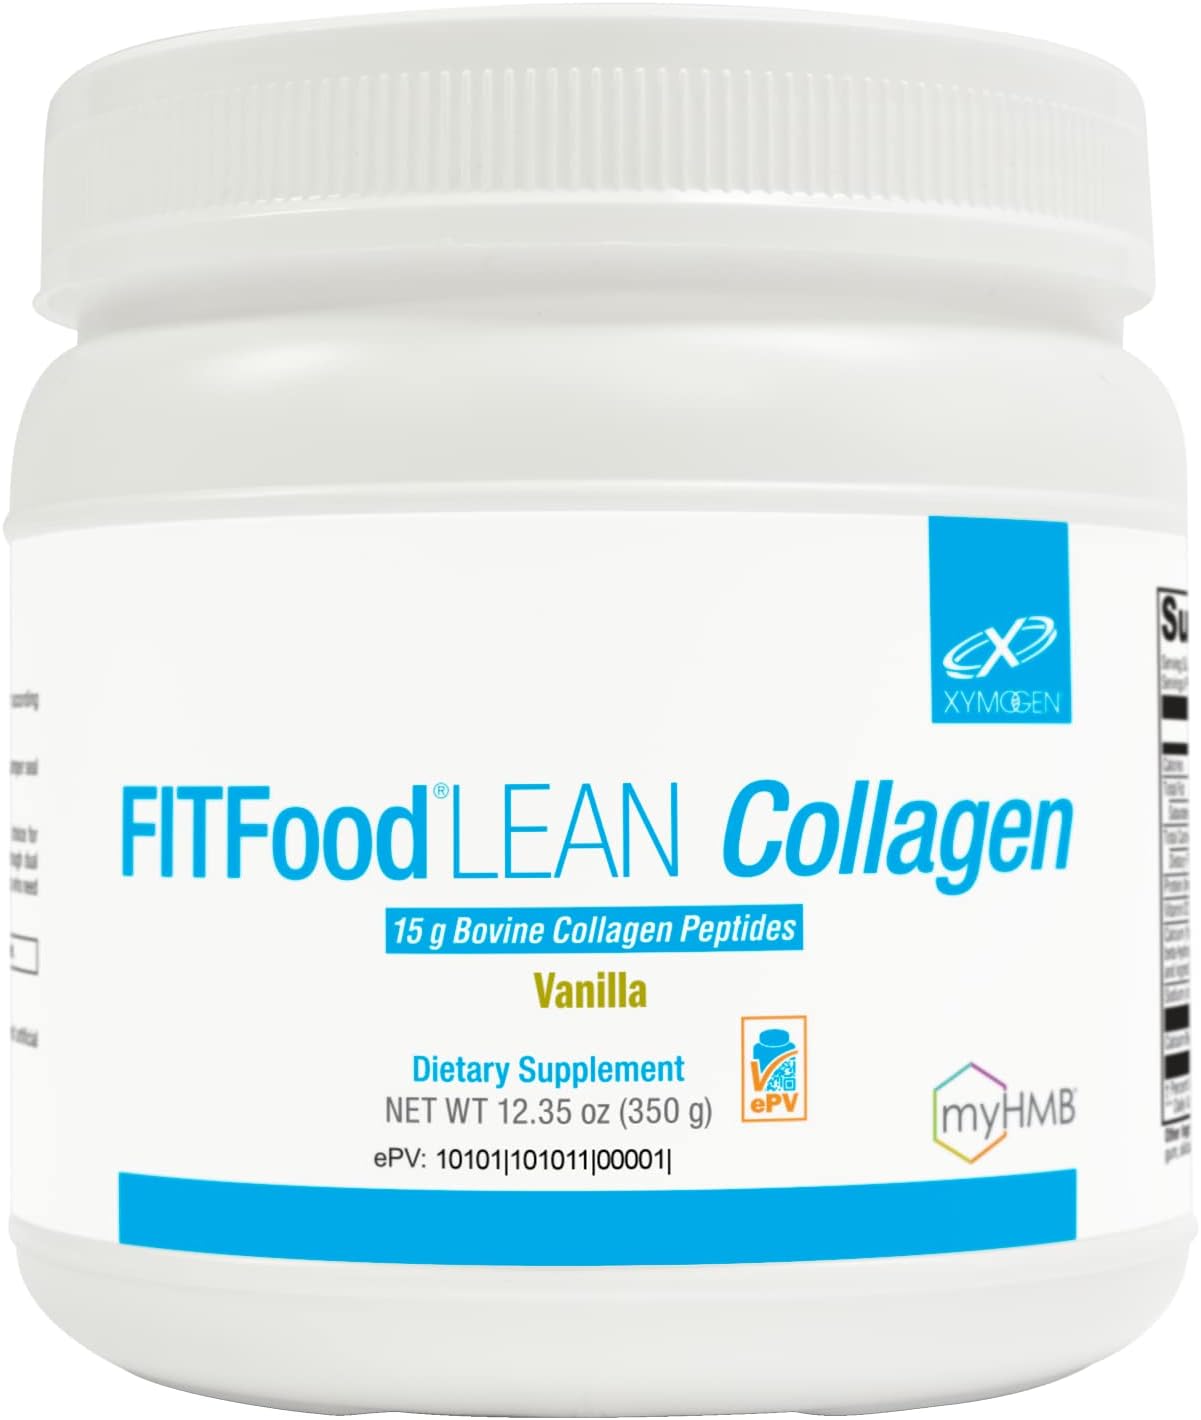 XYMOGEN FIT Food Collagen - Bovine Collagen Peptides Powder with HMB + Vitamin D3-15g Collagen Protein to Support Joints, Muscle Recovery, Collagen Production - Vanilla Flavor (12.35 oz)